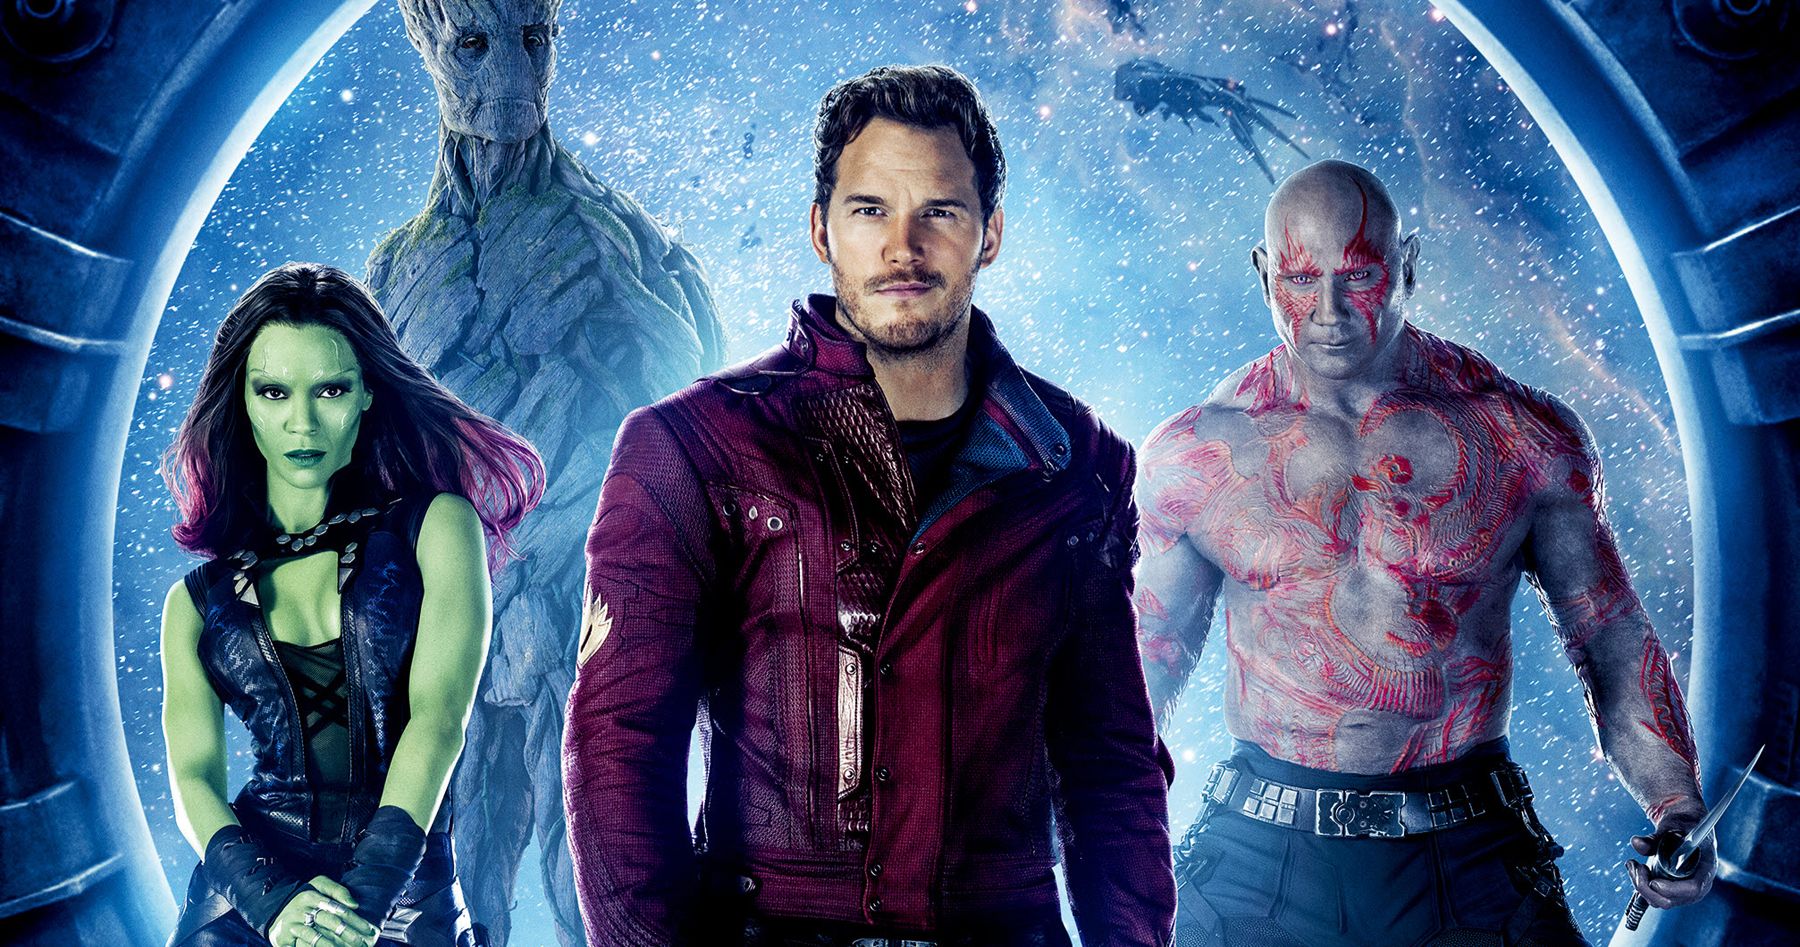 One Big Guardians of the Galaxy Fight Resulted in Marvel Admitting James Gunn Was Right